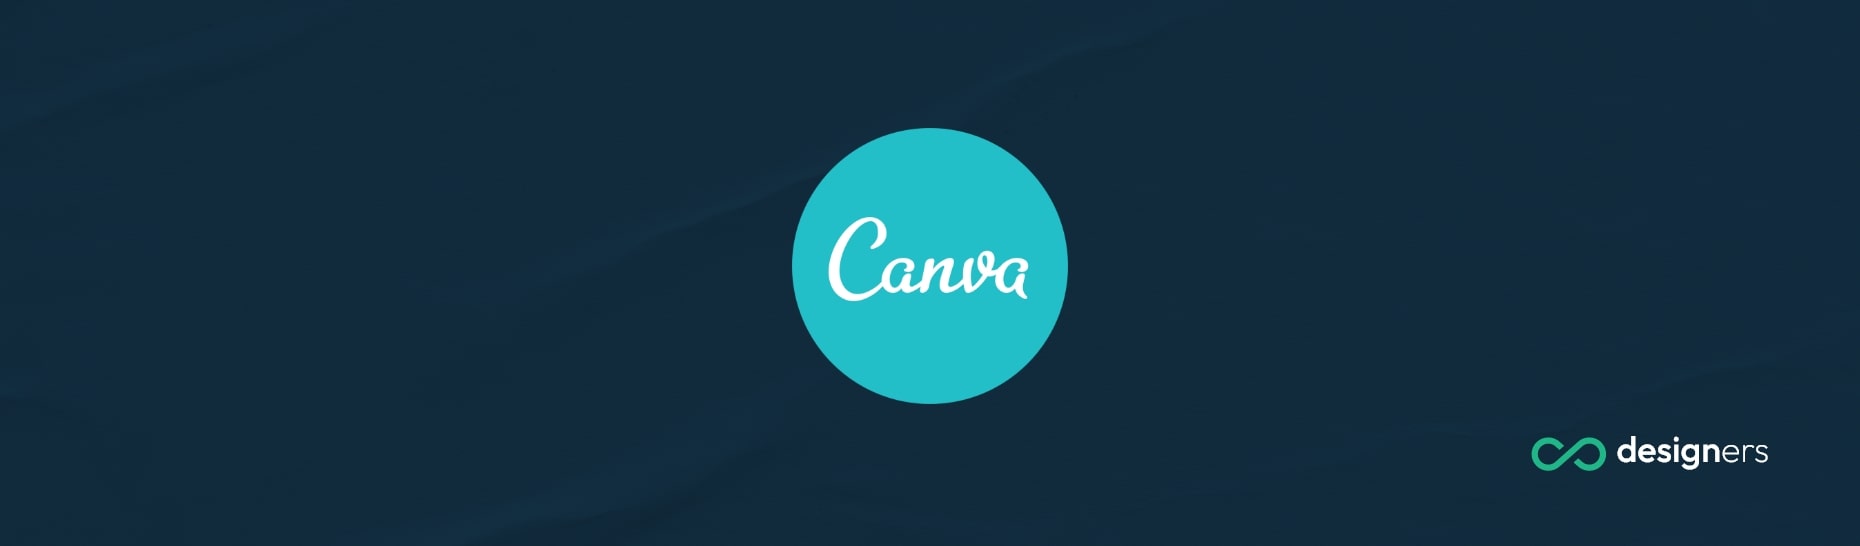 Can I print and sell Canva designs?